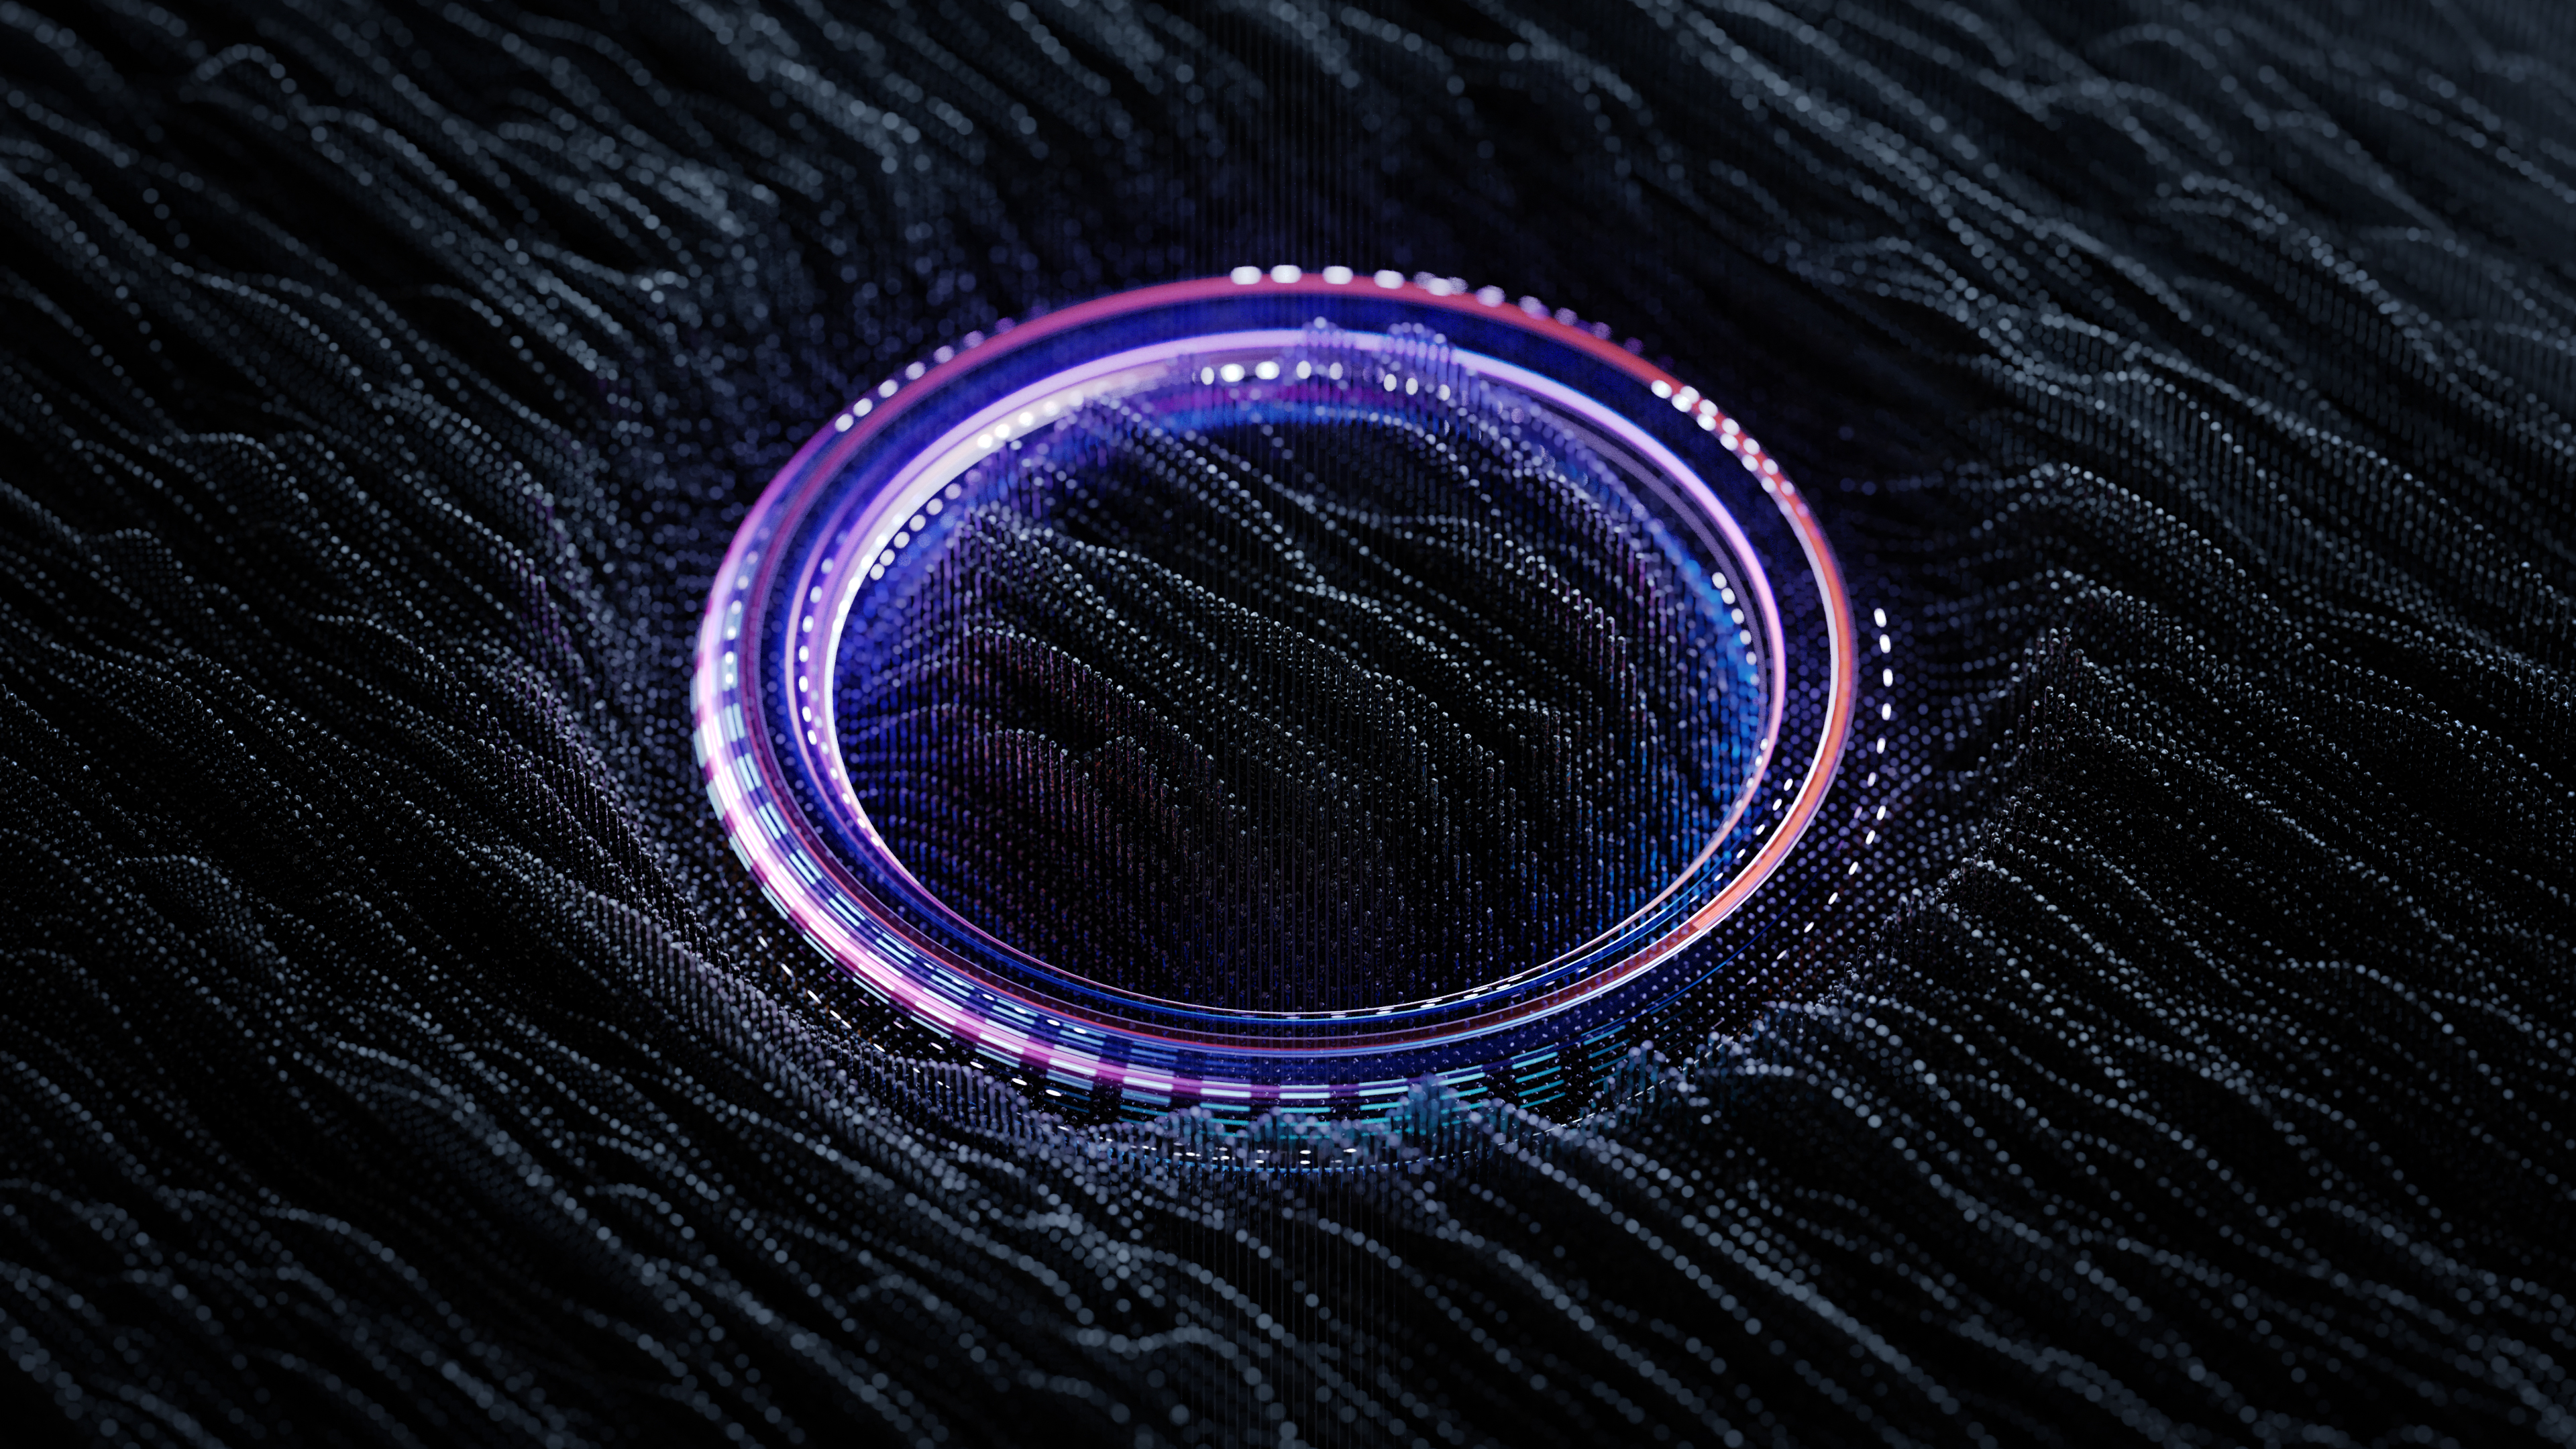 3D Abstract Artwork Digital Art Render Waves Isometric Rings Lights Futuristic Cyberspace Technology 3840x2160